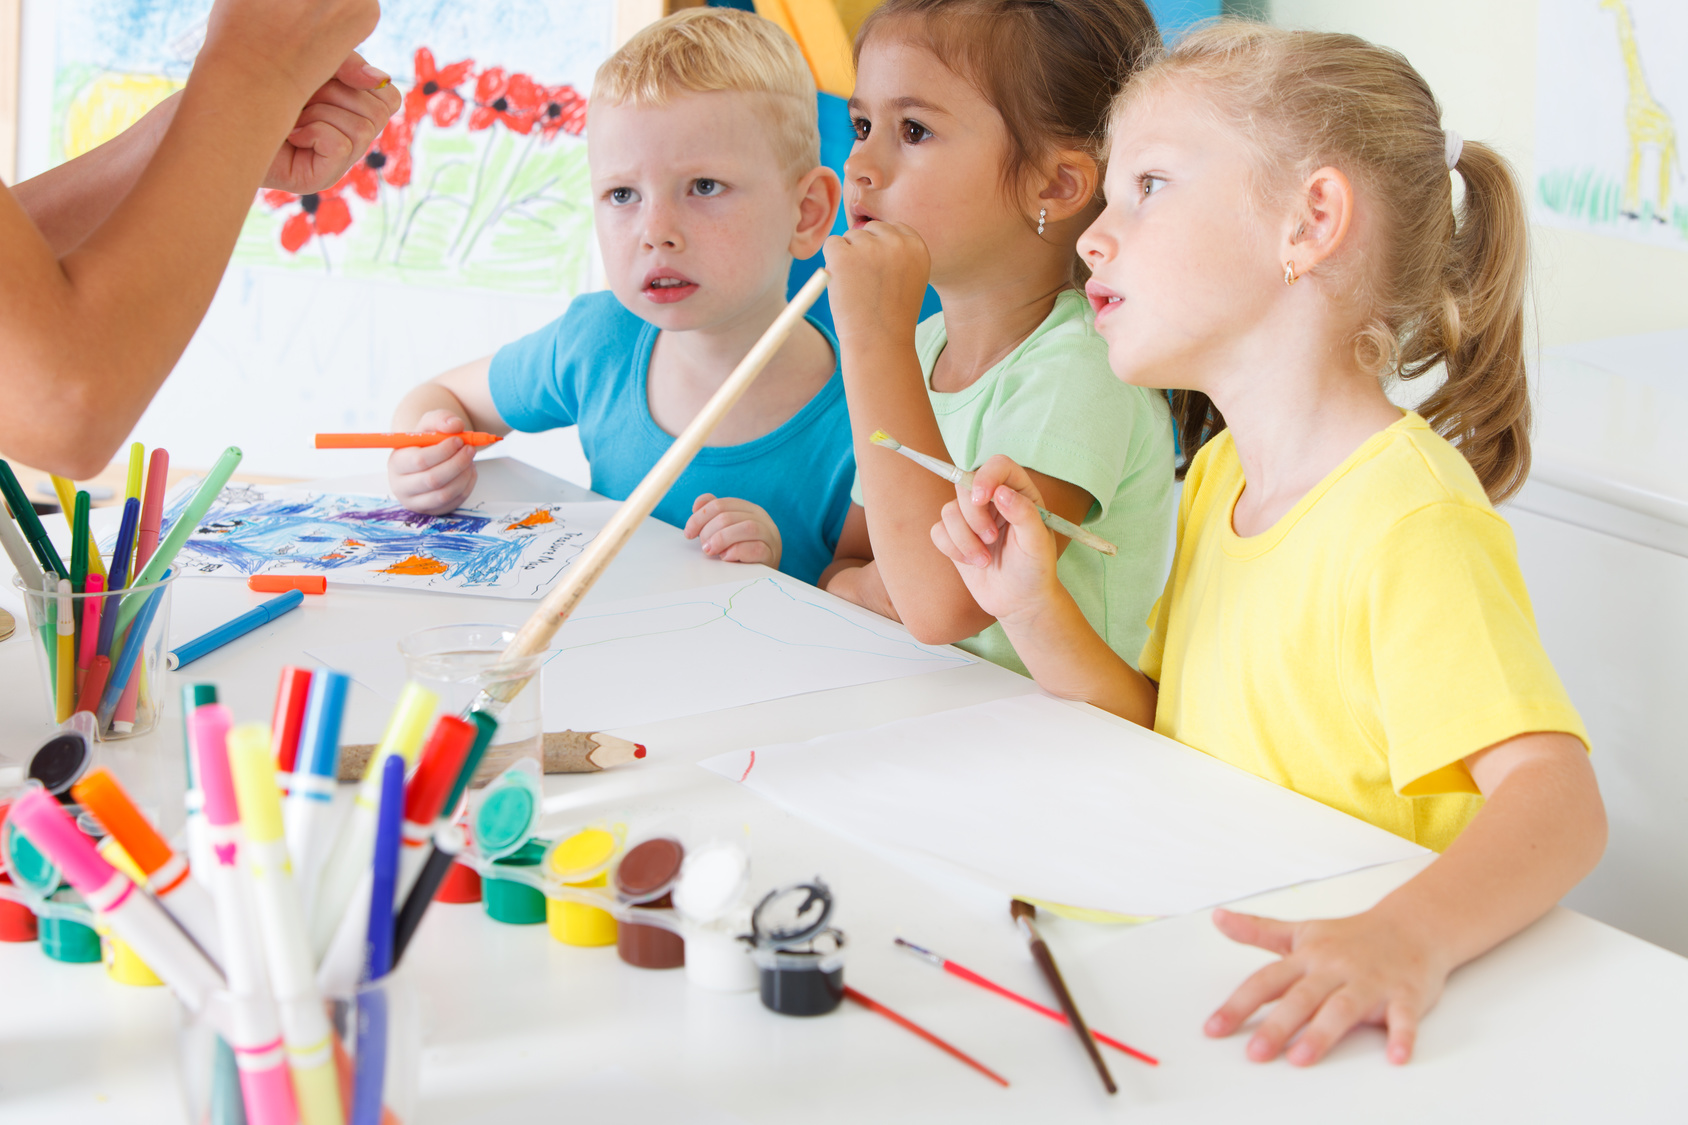 Children draw in the classroom